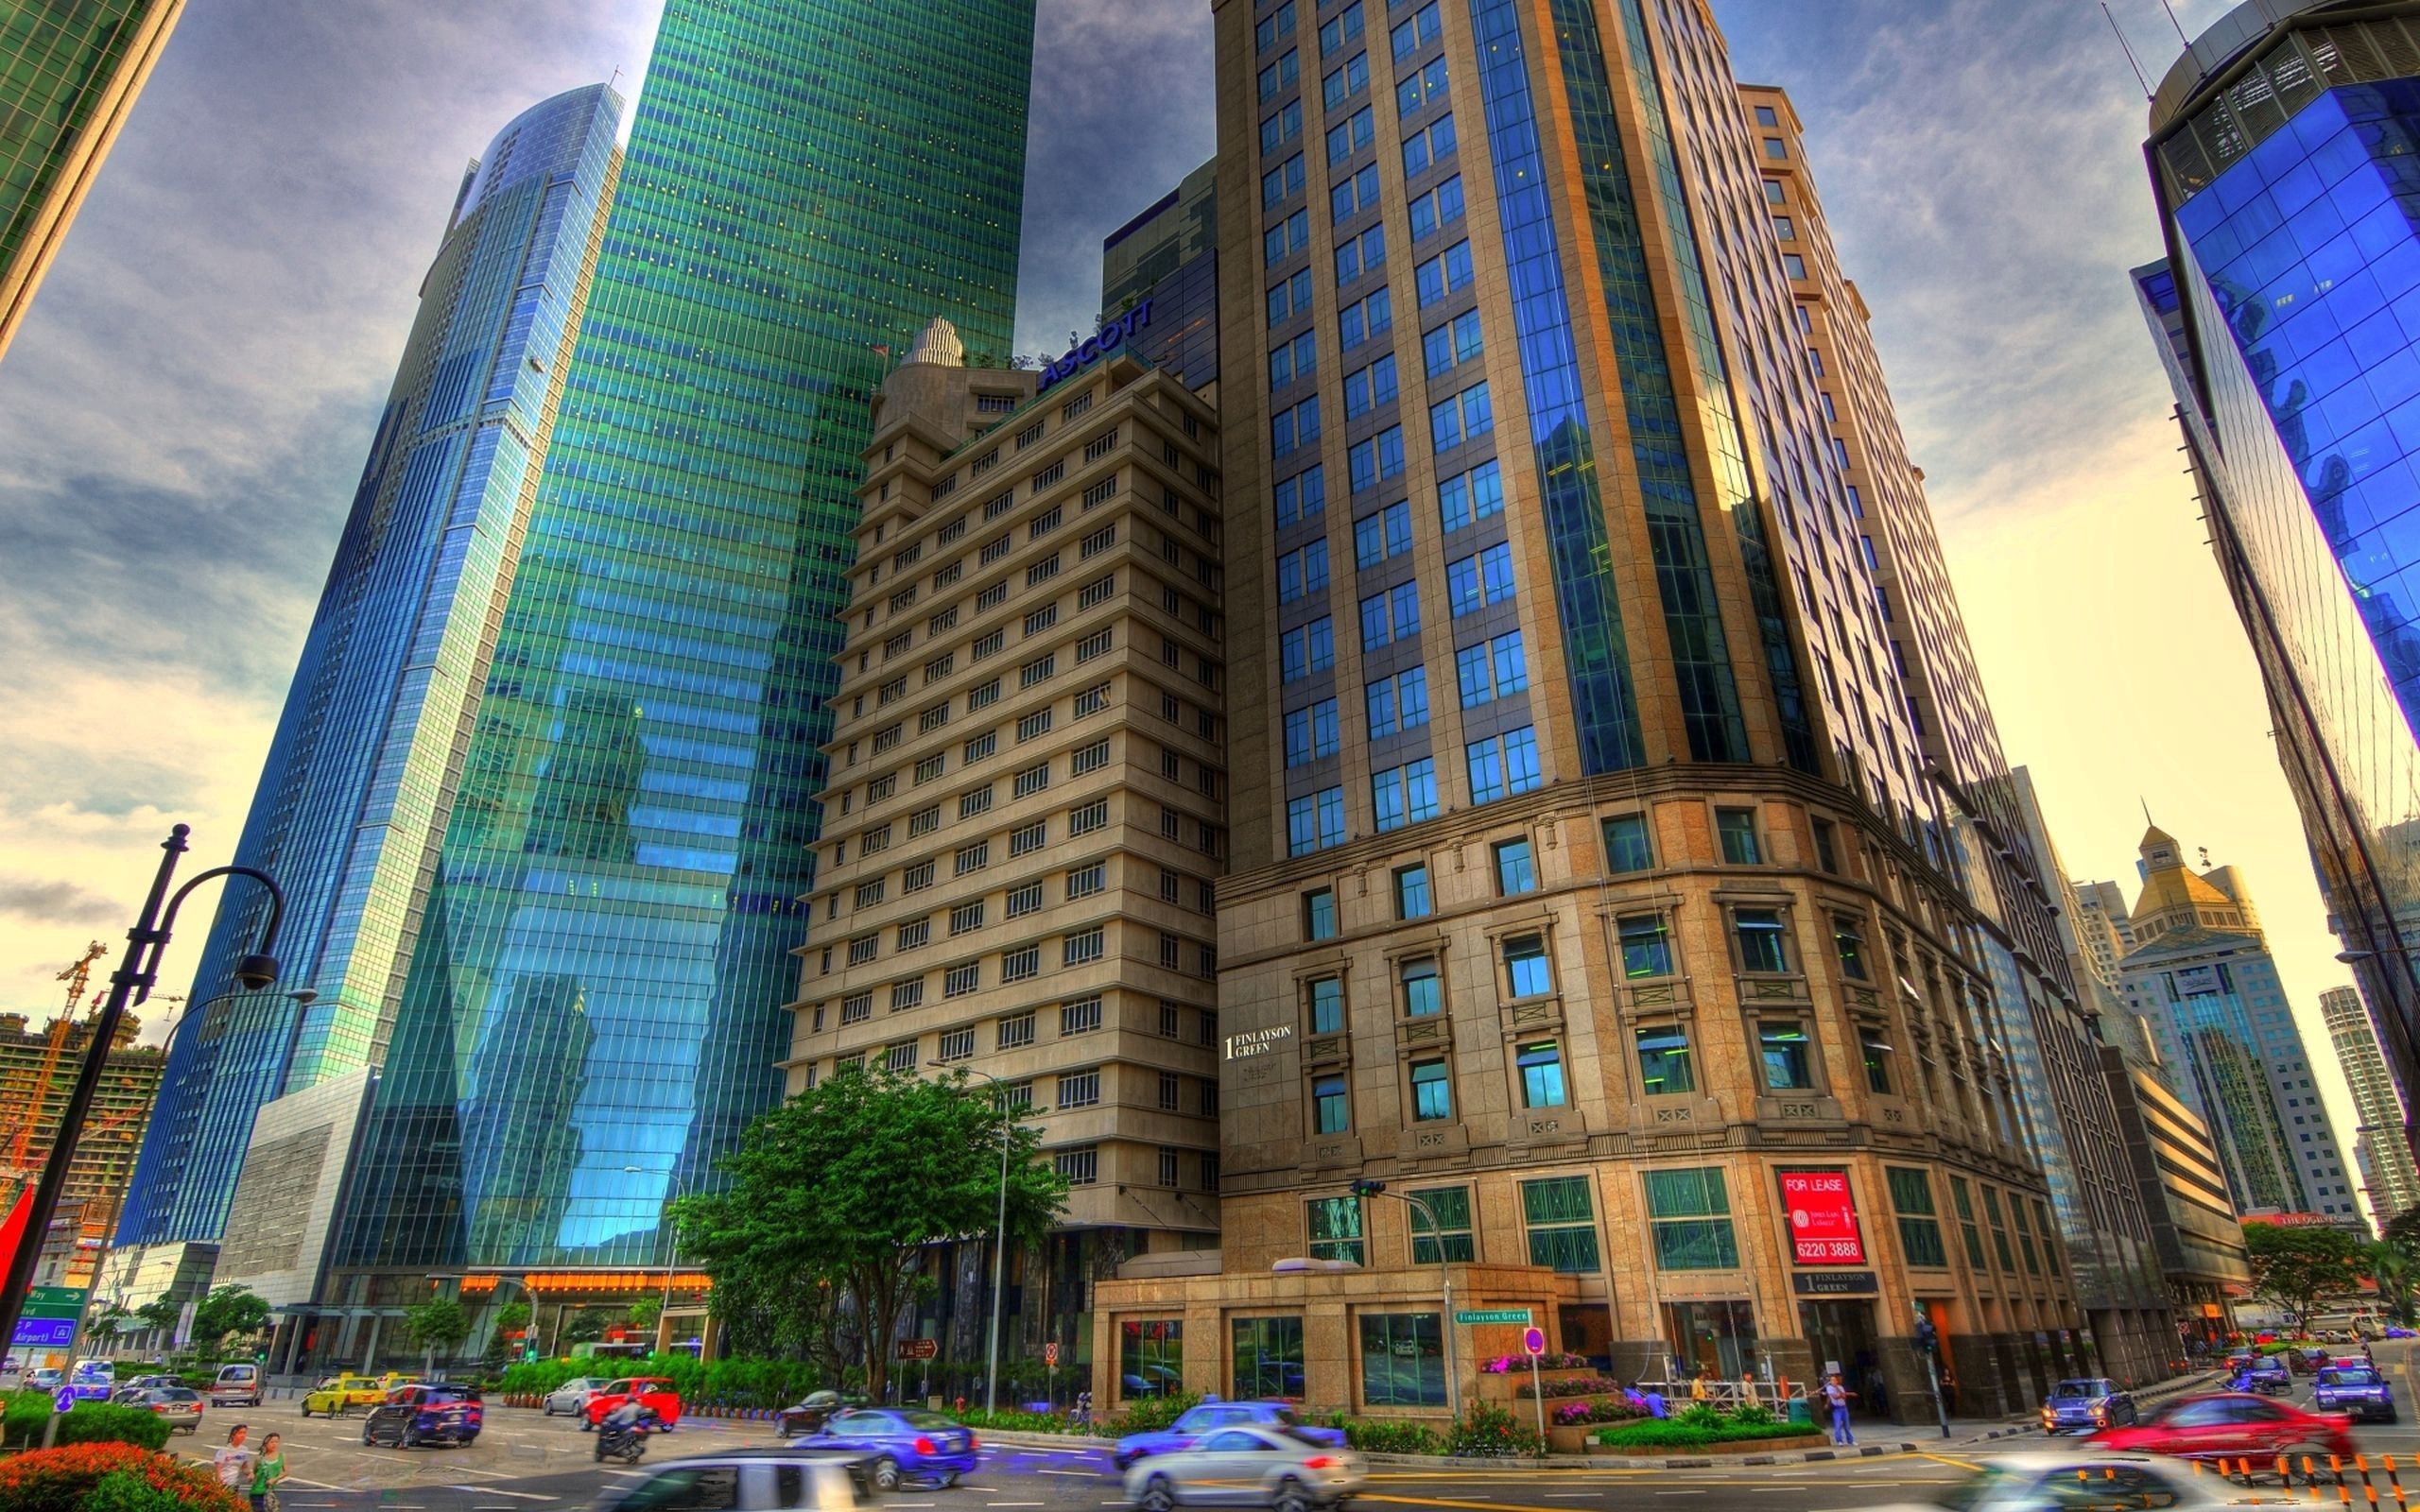 wallpapers megapolis, street, cities, city, building, traffic, movement, megalopolis, hdr